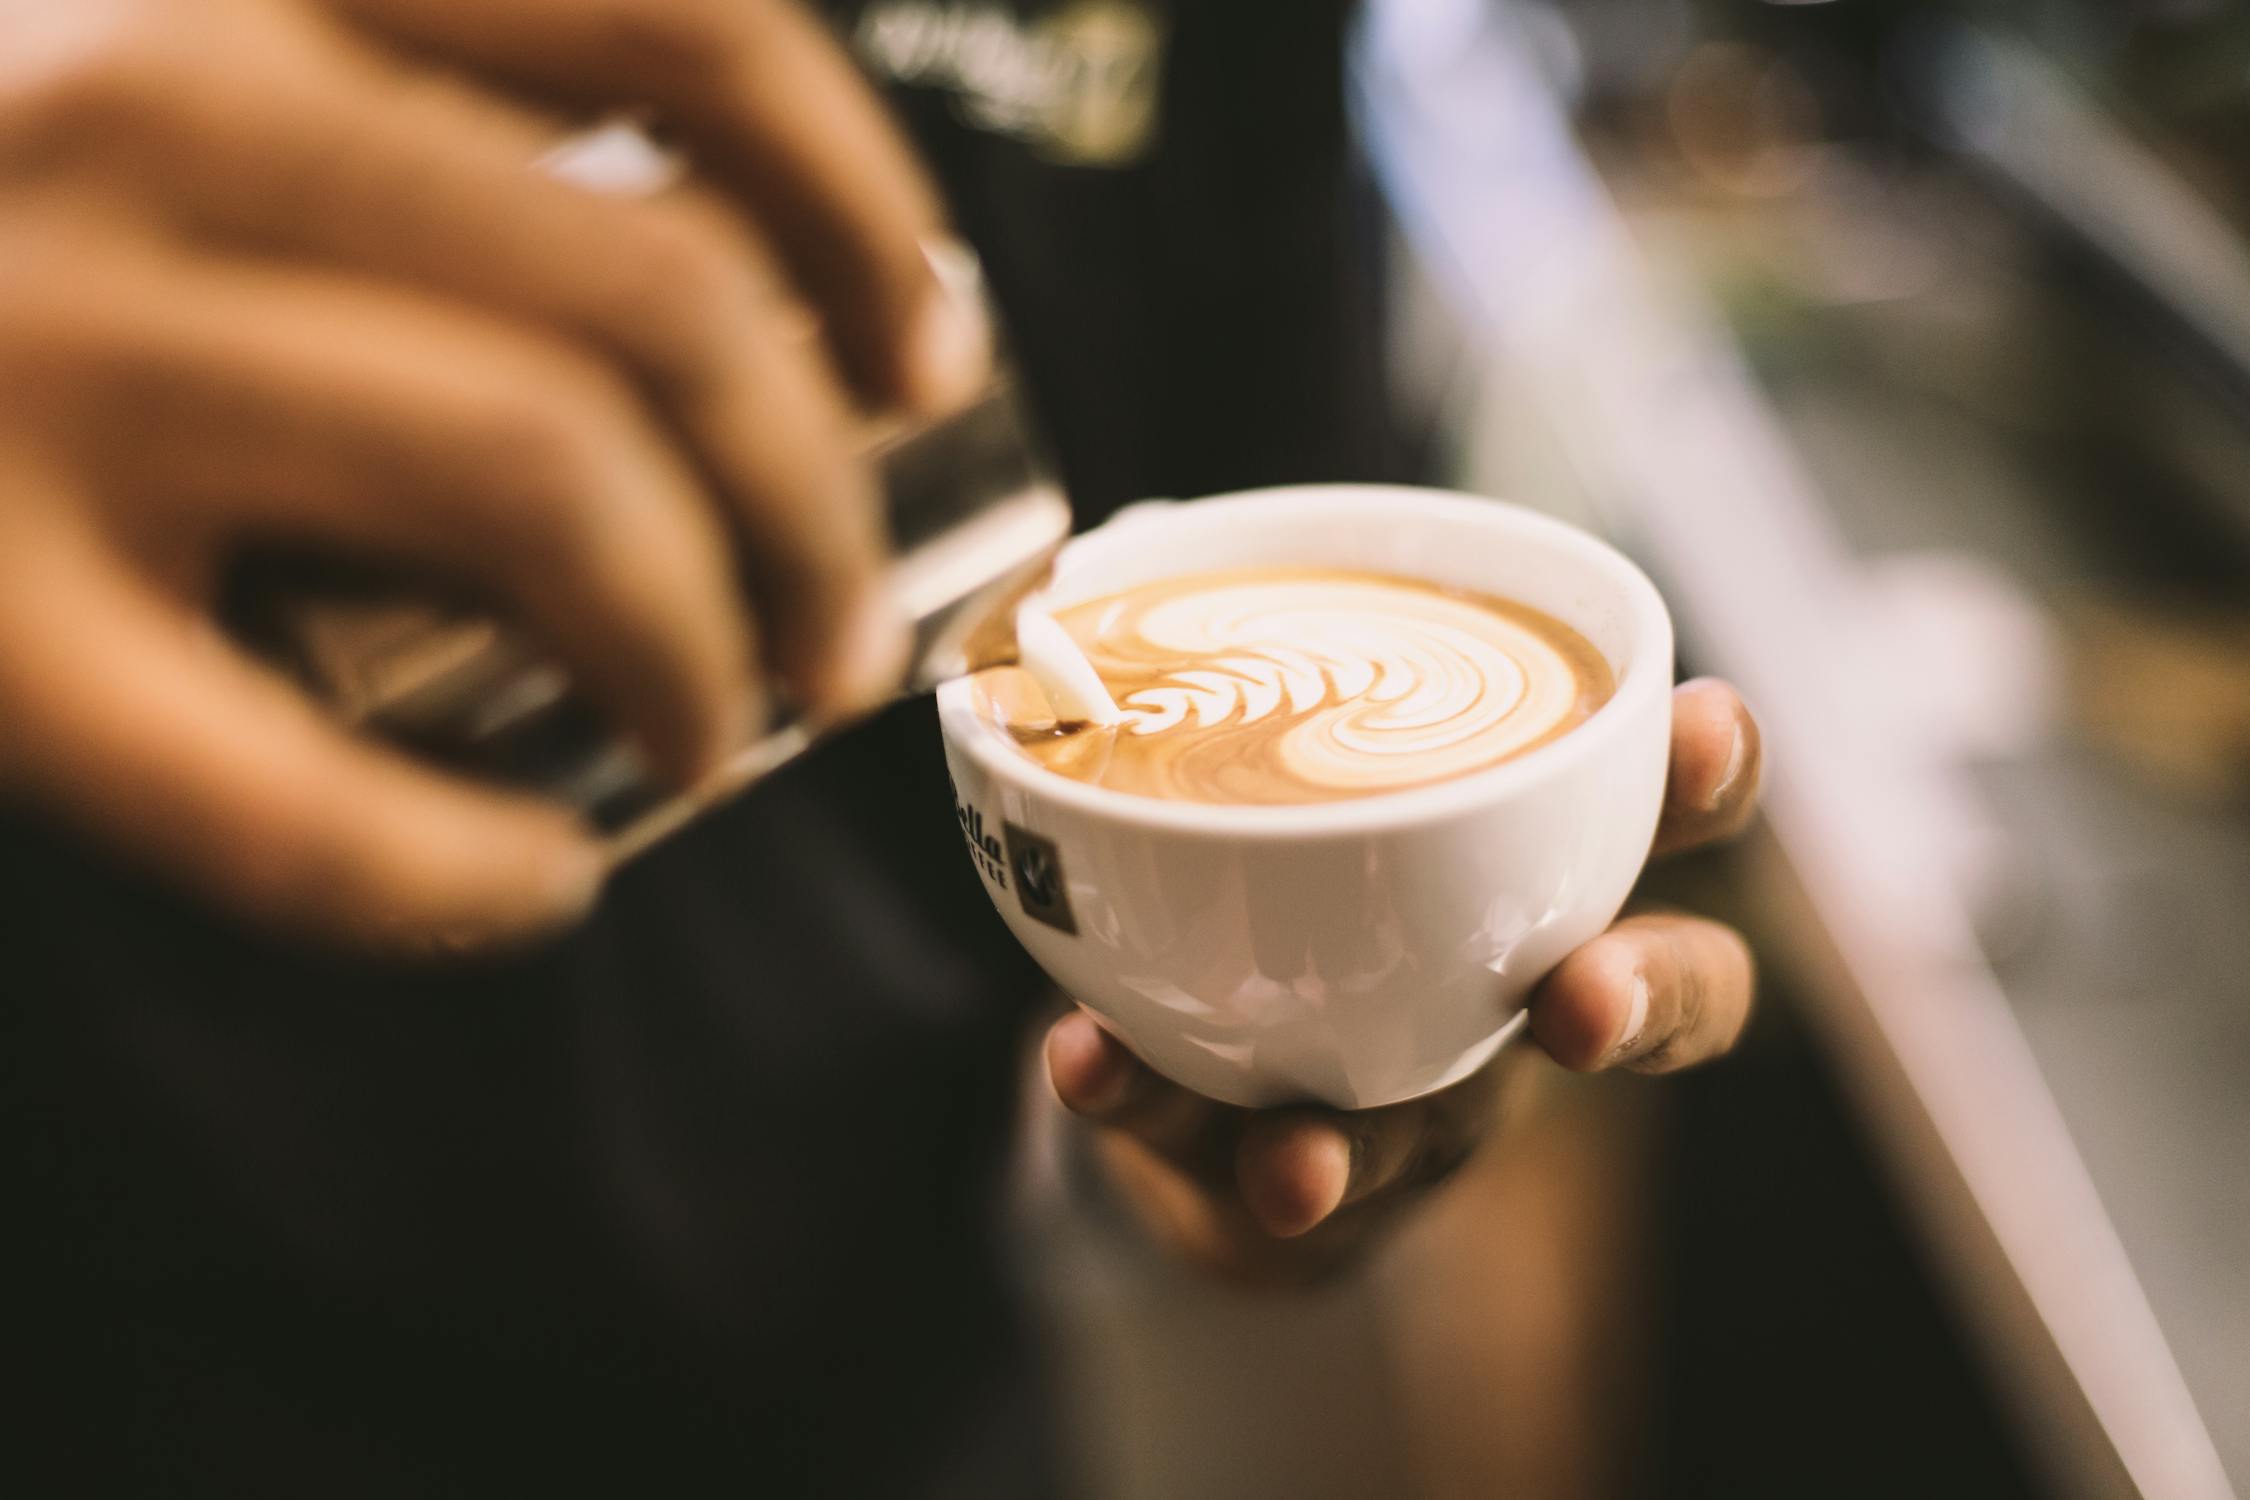 Image of person holding white ceramic mug filled with cappuccino